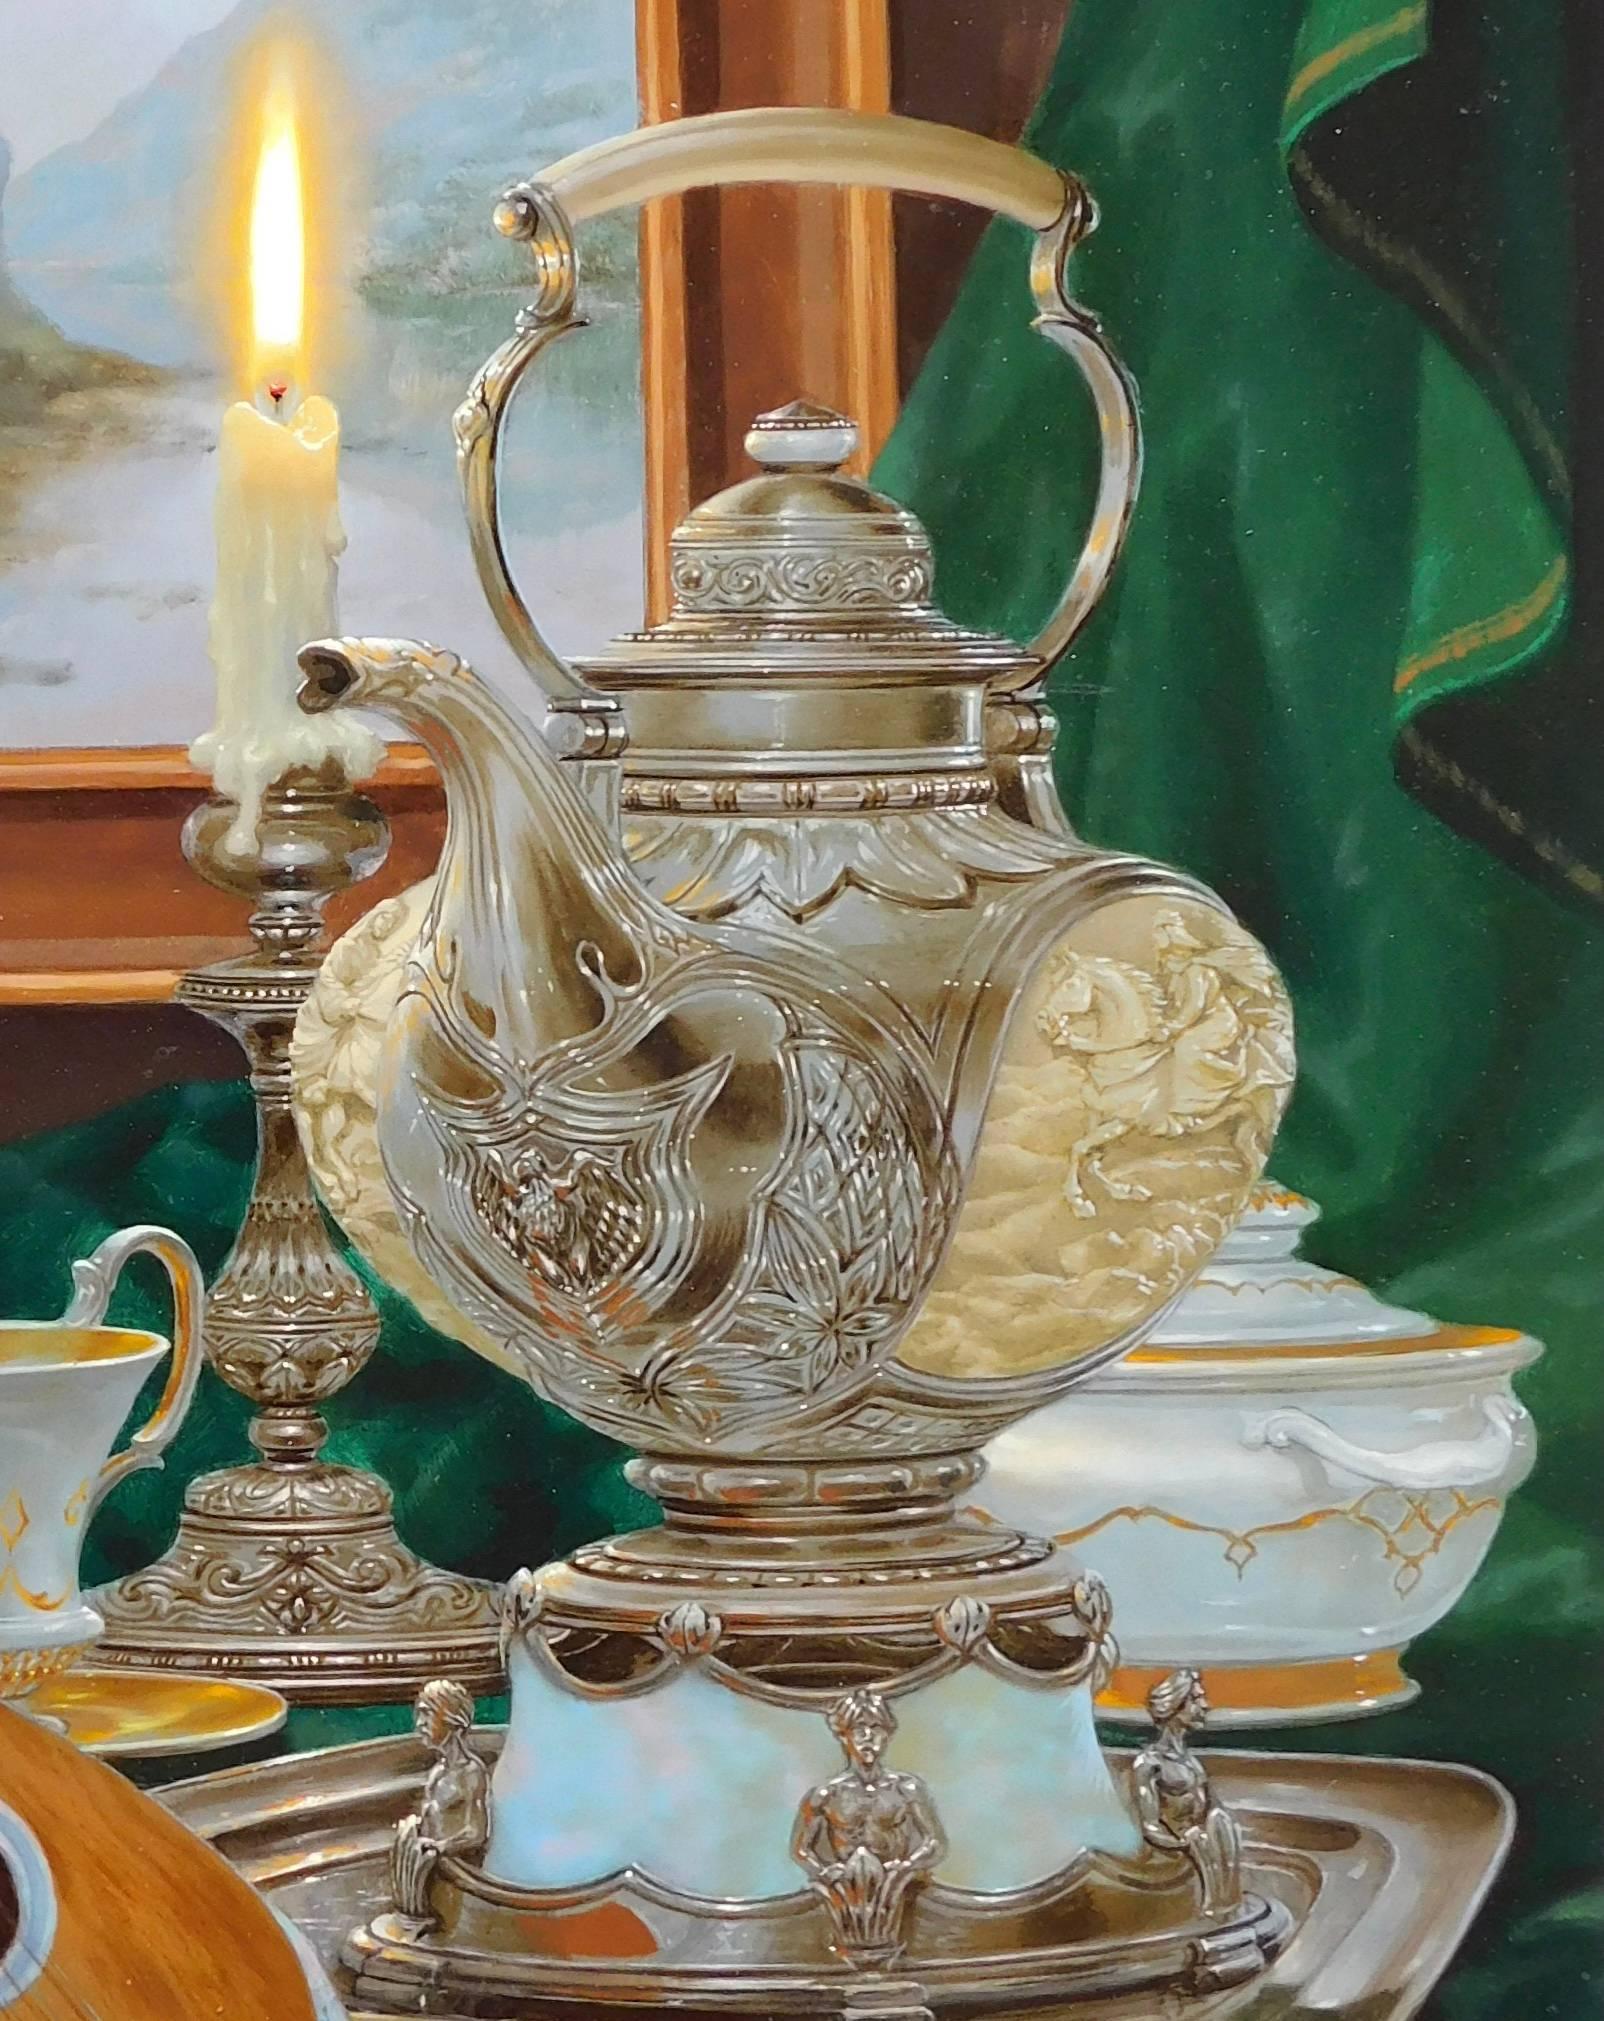 Hungarian still life artist Gyula Boros showcasing his unique dutch and baroque classical style. His technique is unrivalled and pallete unique, found in private collections and museums worldwide, a working master at the easel.